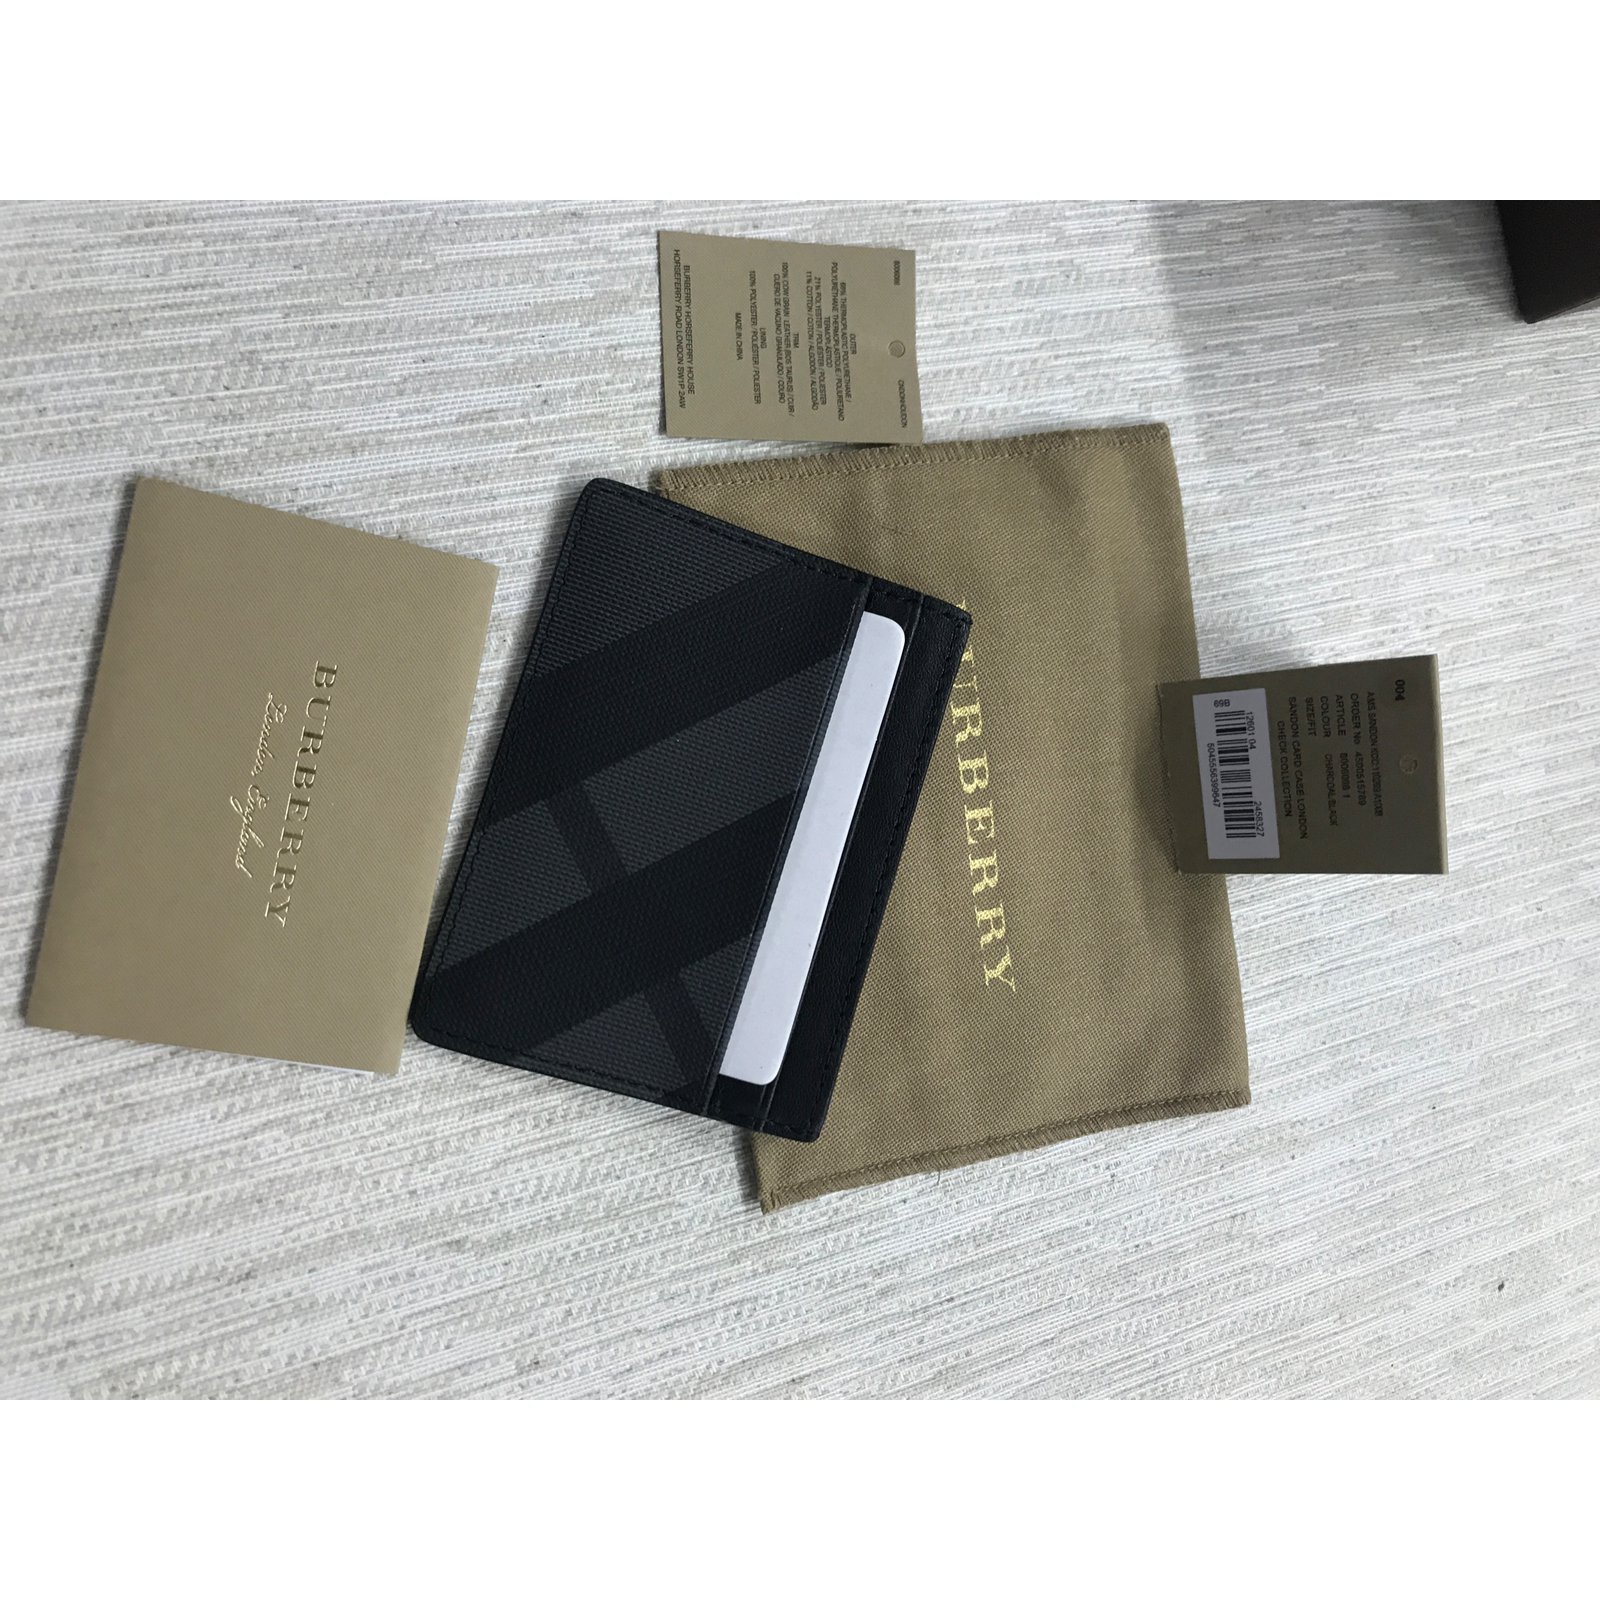 Burberry House Check Leather money, Clip Card Case in black